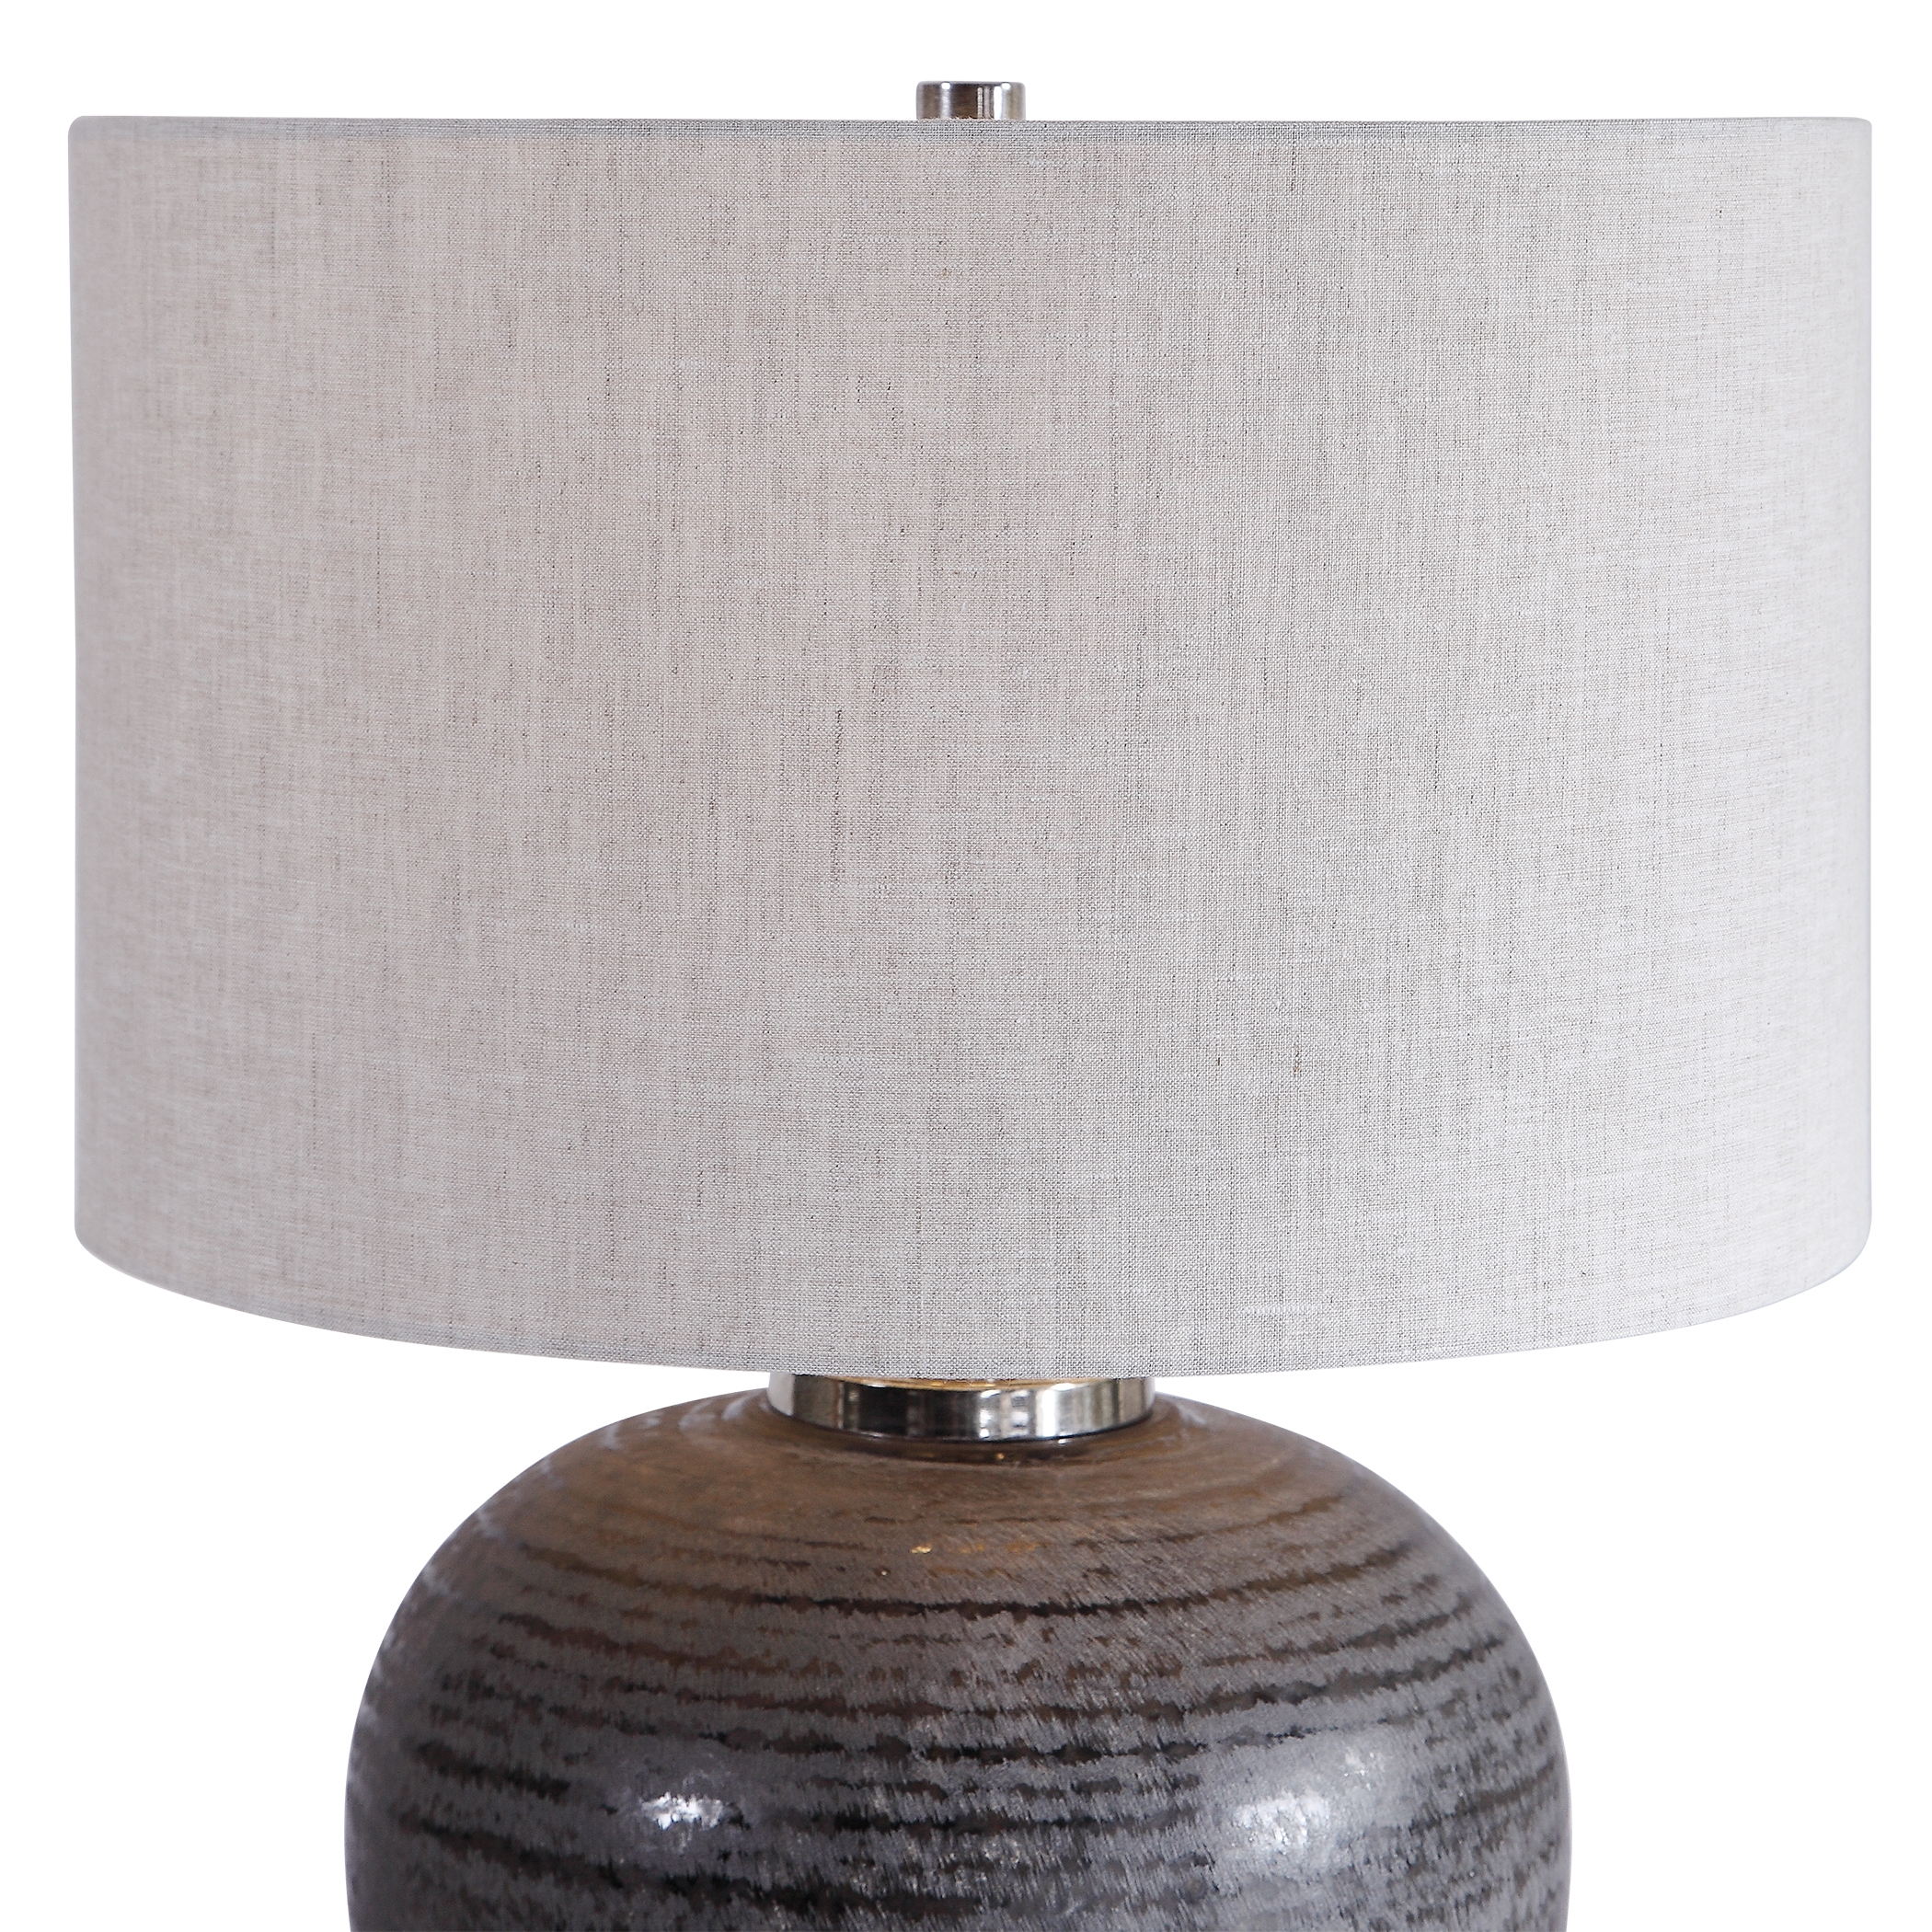 Mikkel Charcoal Table Lamp- AVAIL: AUG 13, 2021 - Image 3